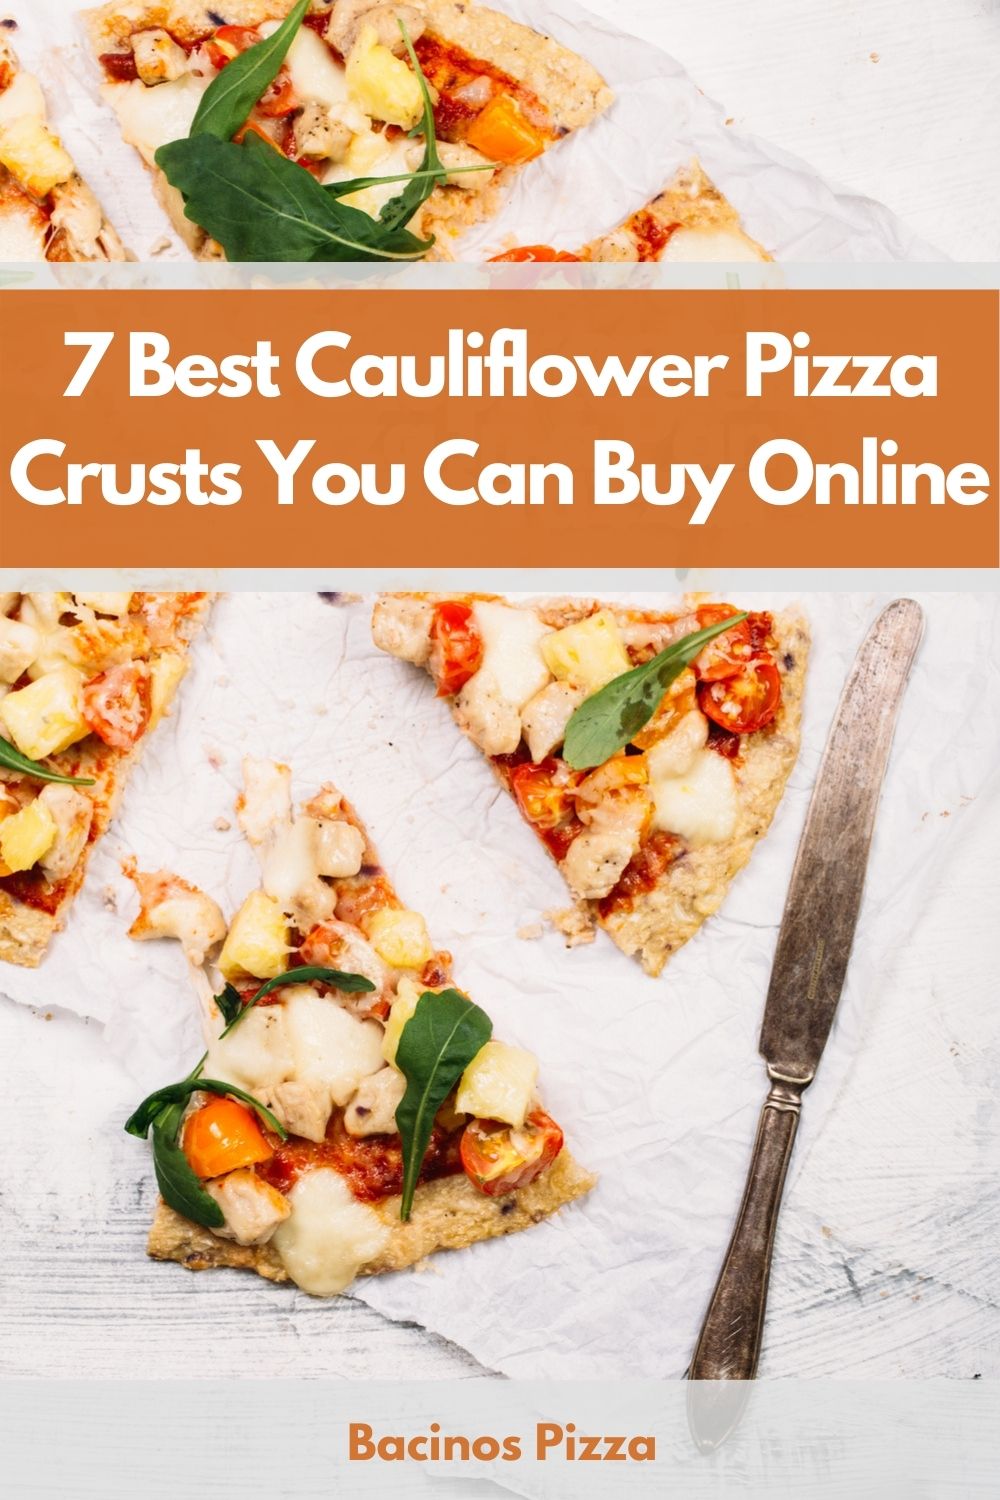 7 Best Cauliflower Pizza Crusts You Can Buy Online pin 2